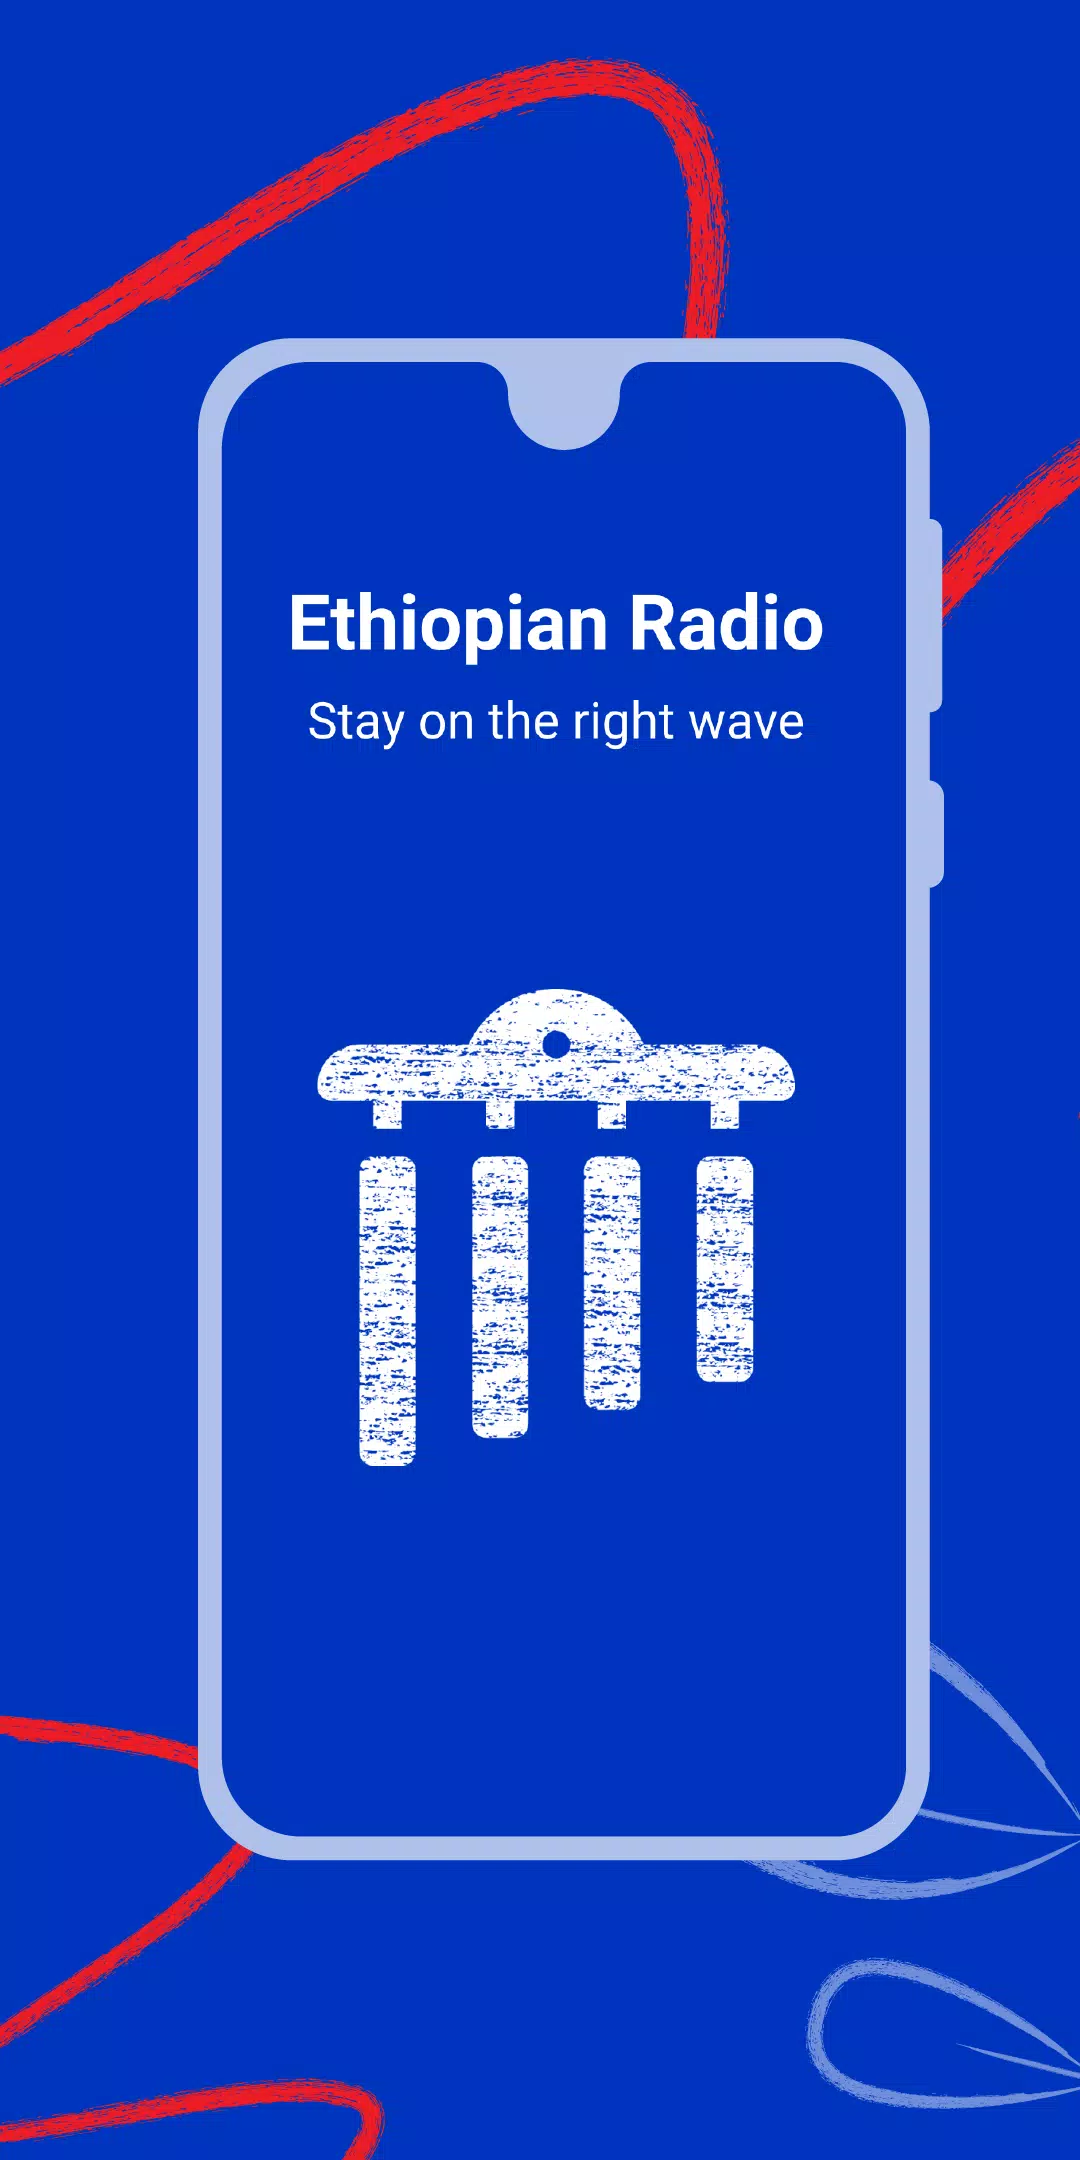 Ethiopian Radio - Live FM Player for Android - APK Download